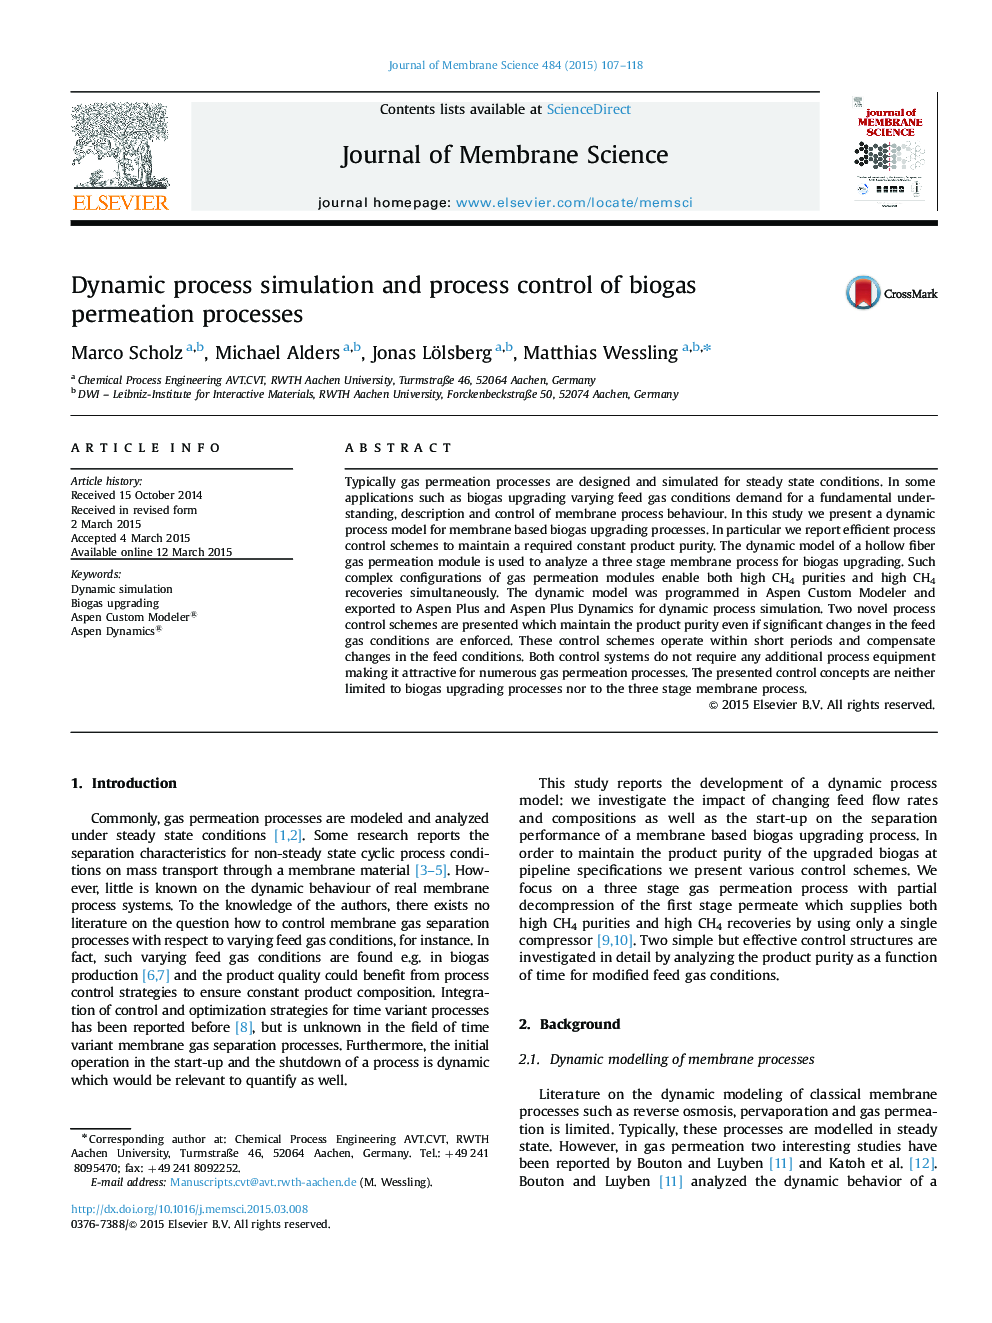 Dynamic process simulation and process control of biogas permeation processes